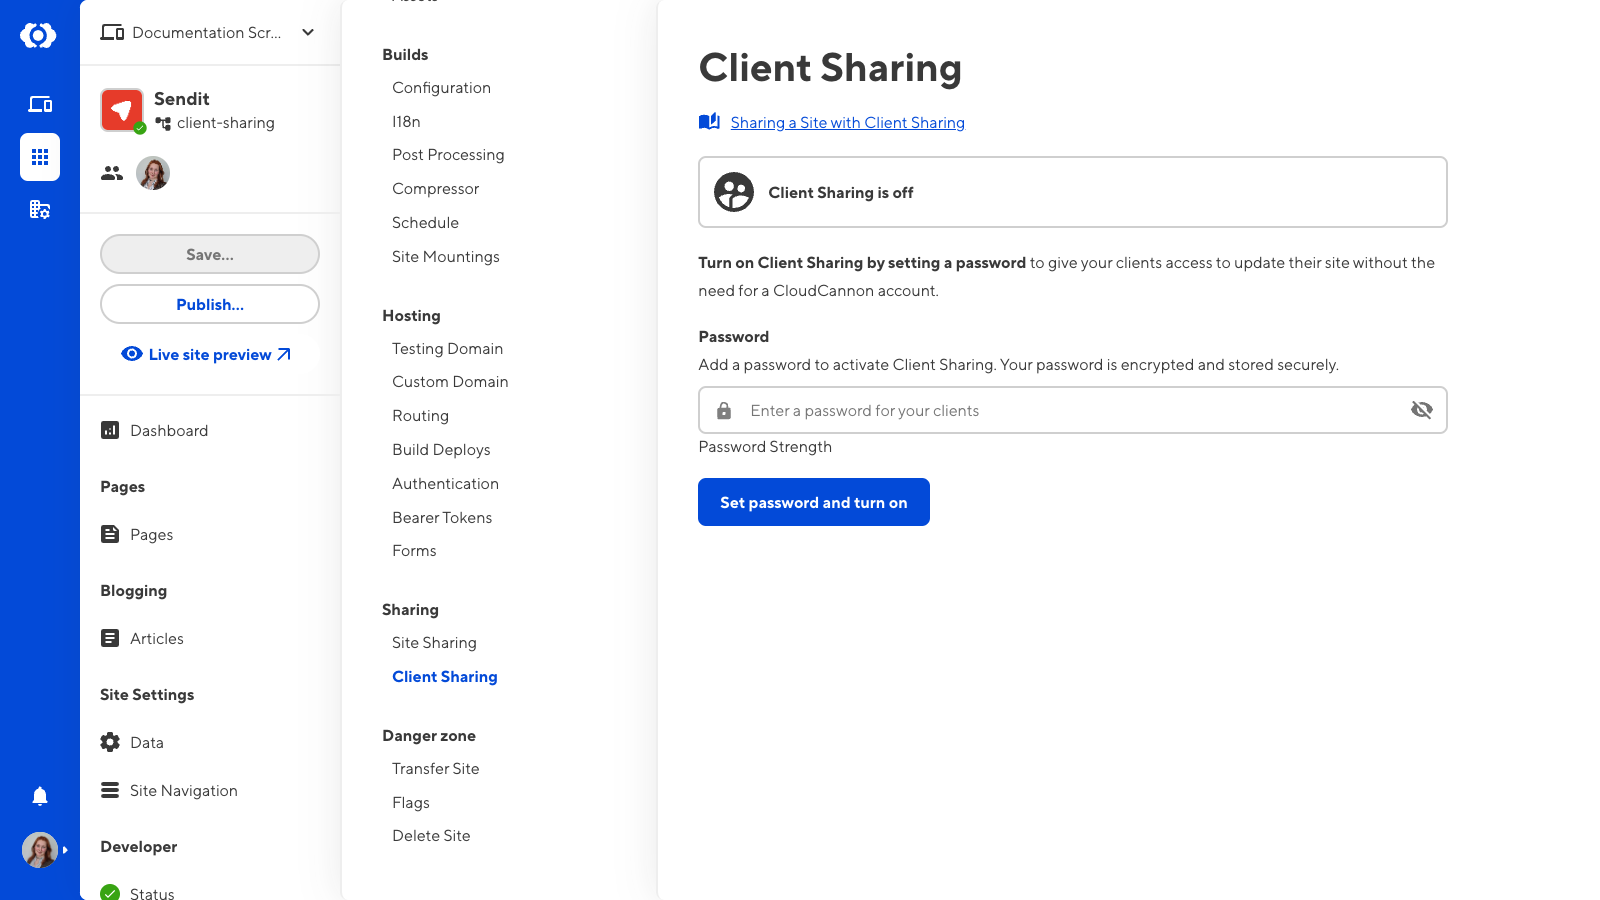 A screenshot of the Client Sharing page shows a field for setting the Client password and a button to enable Client Sharing.